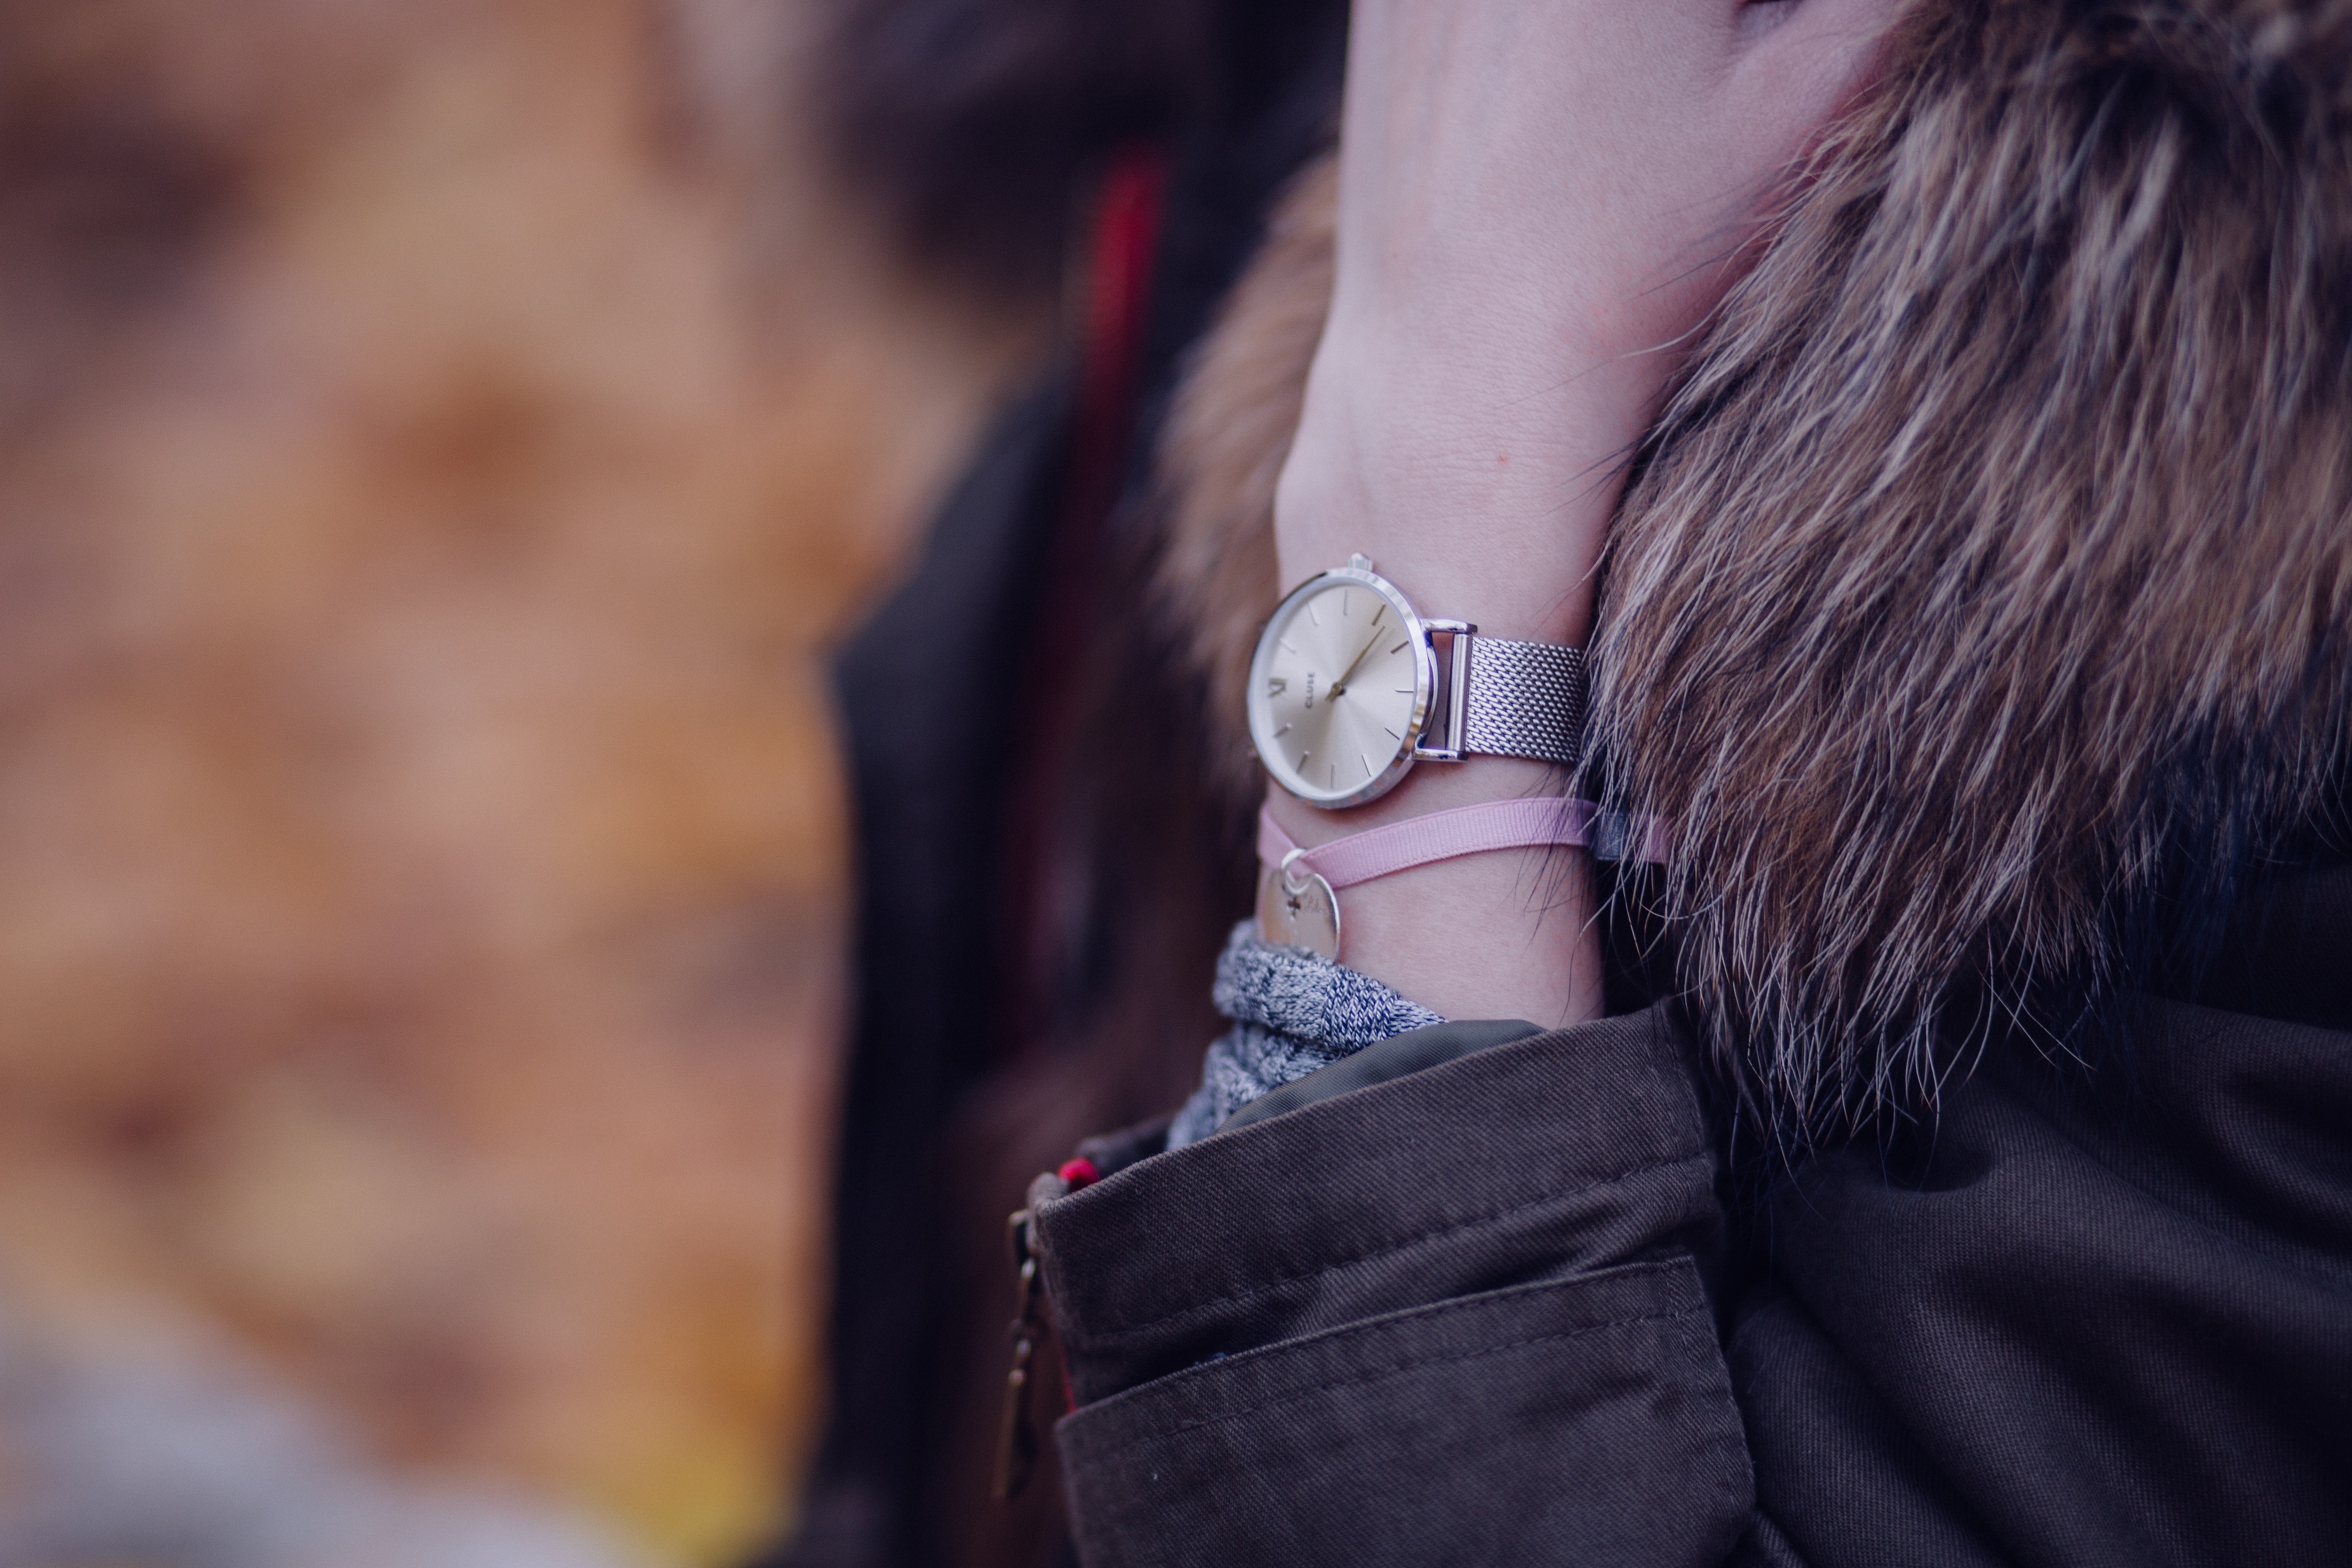 person wearing black-and-brown fur coat with pink bracelet and silver analog watch in left arm